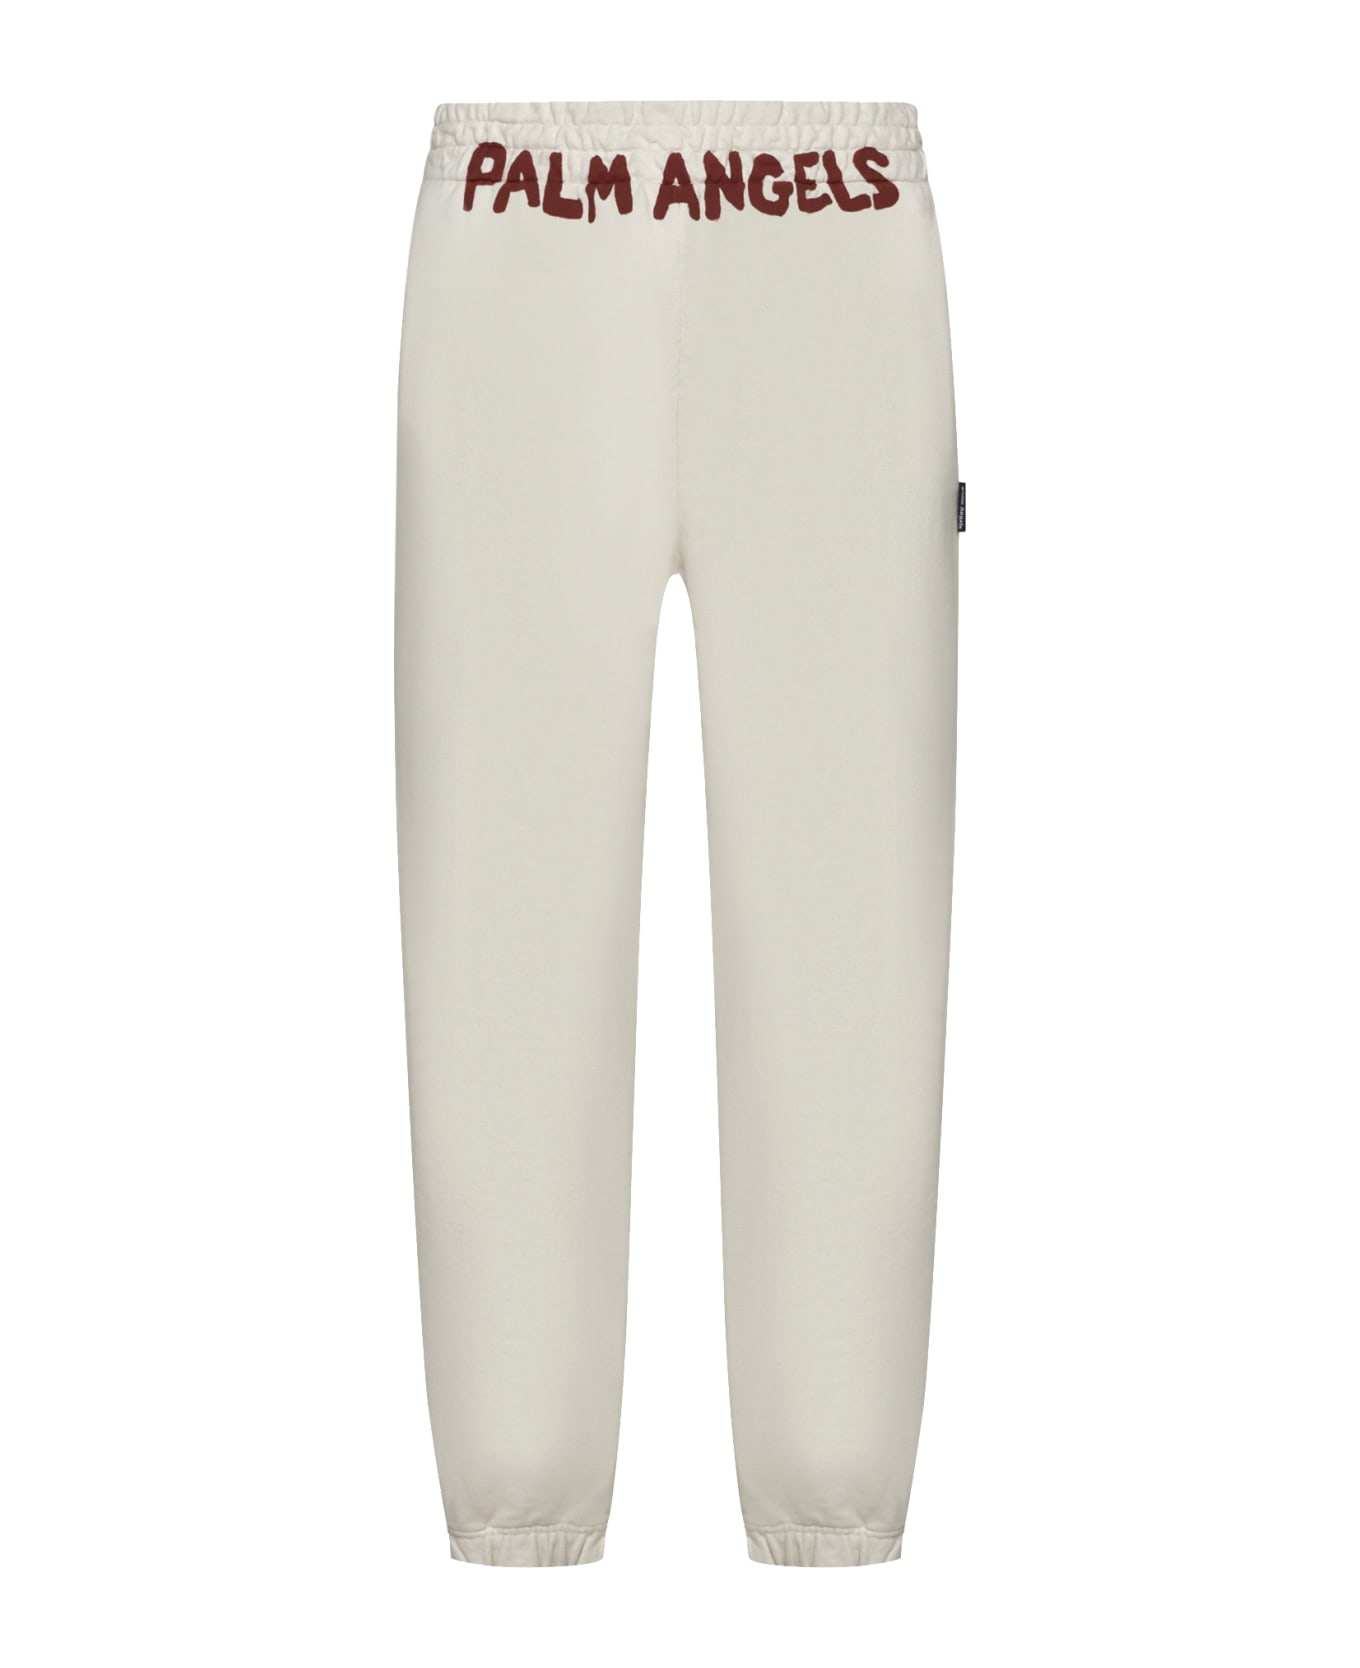 Palm Angels Pants - Off white red スウェットパンツ